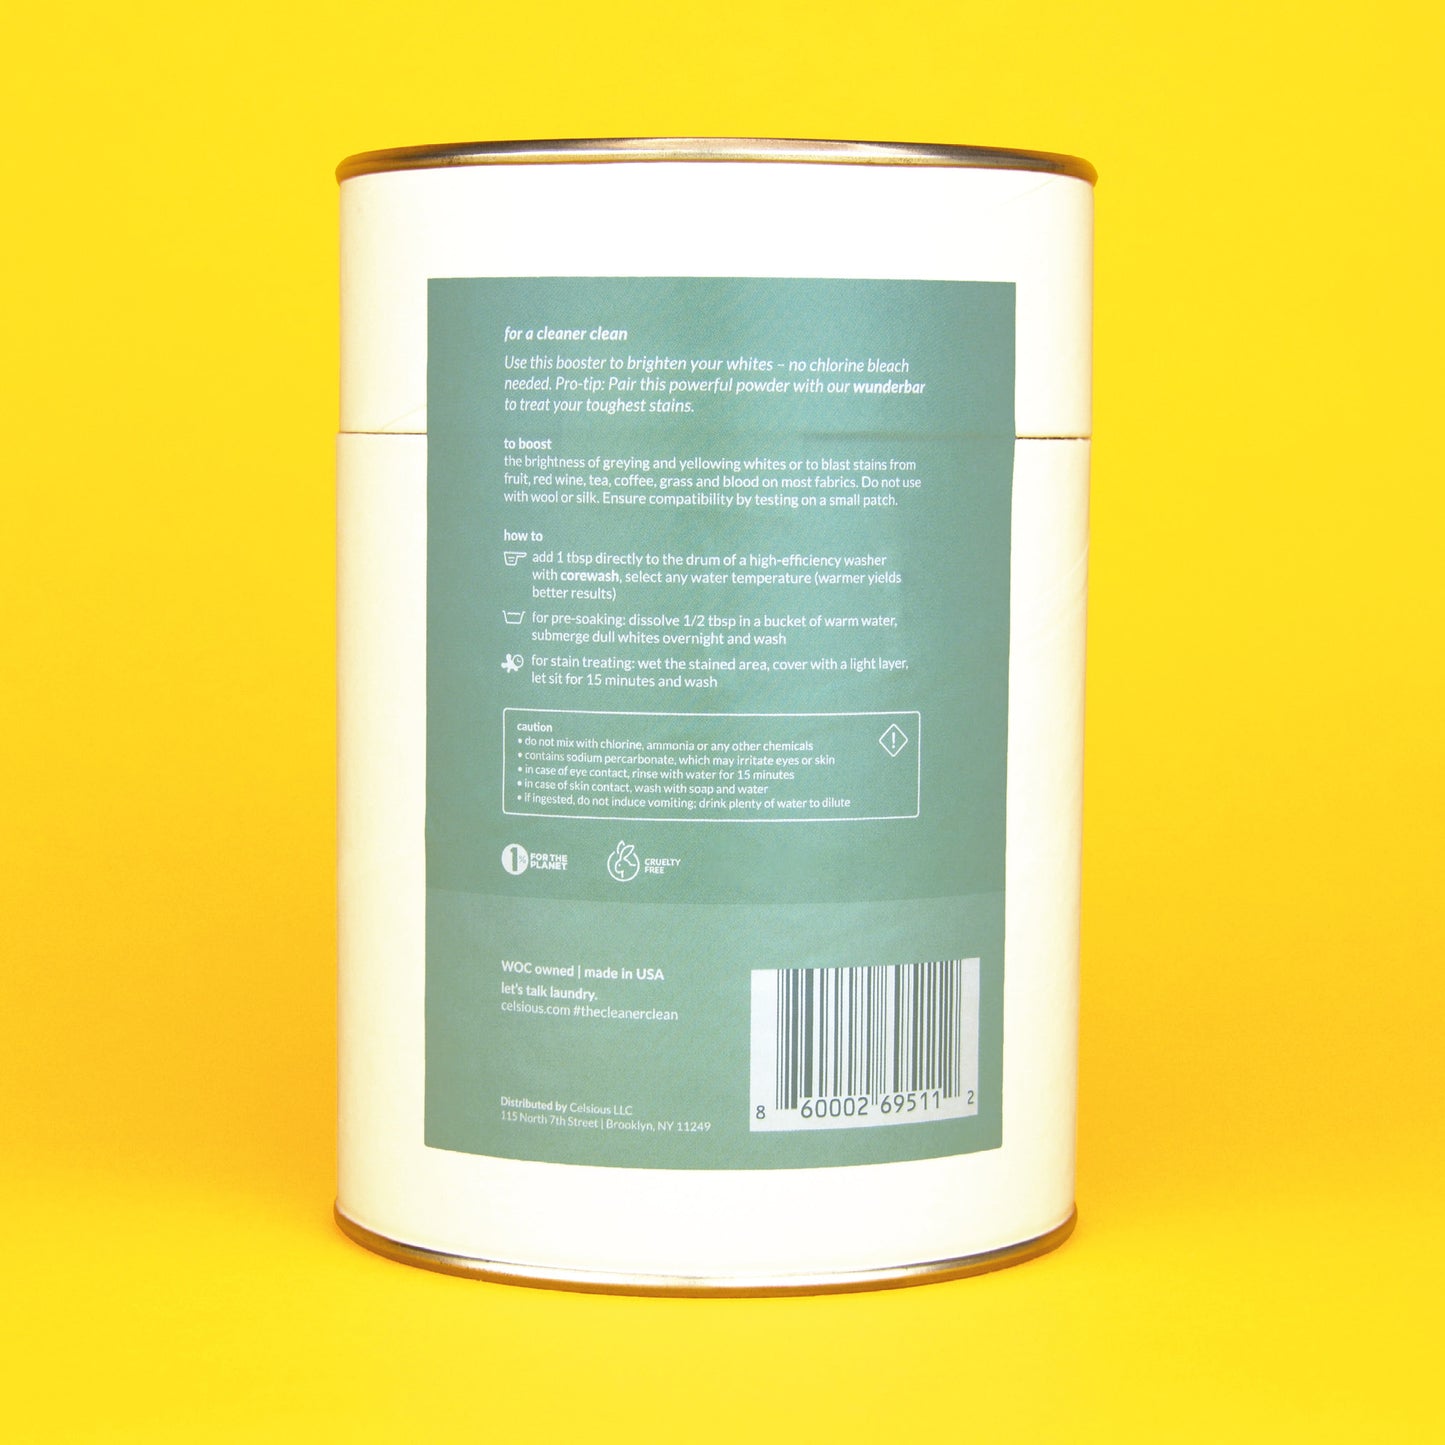 The back of a white canister of Supersalt oxygen booster with a seafoam green label and instructions, photographed on a yellow backdrop